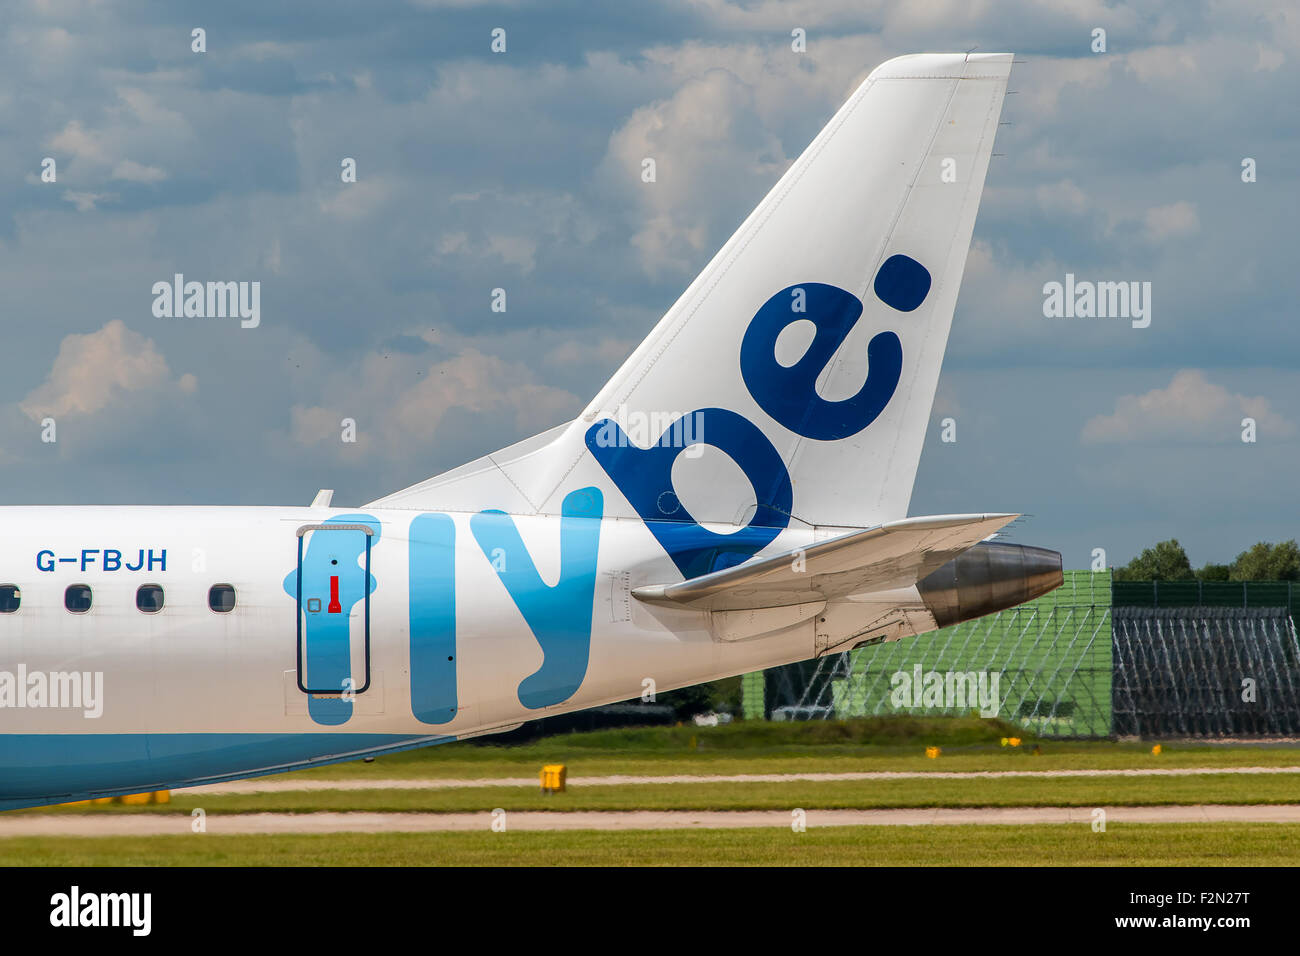 MANCHESTER, UNITED KINGDOM - AUG 07, 2015: Flybe Embraer ERJ-175 tail livery at Manchester Airport Aug 07 2015. Stock Photo